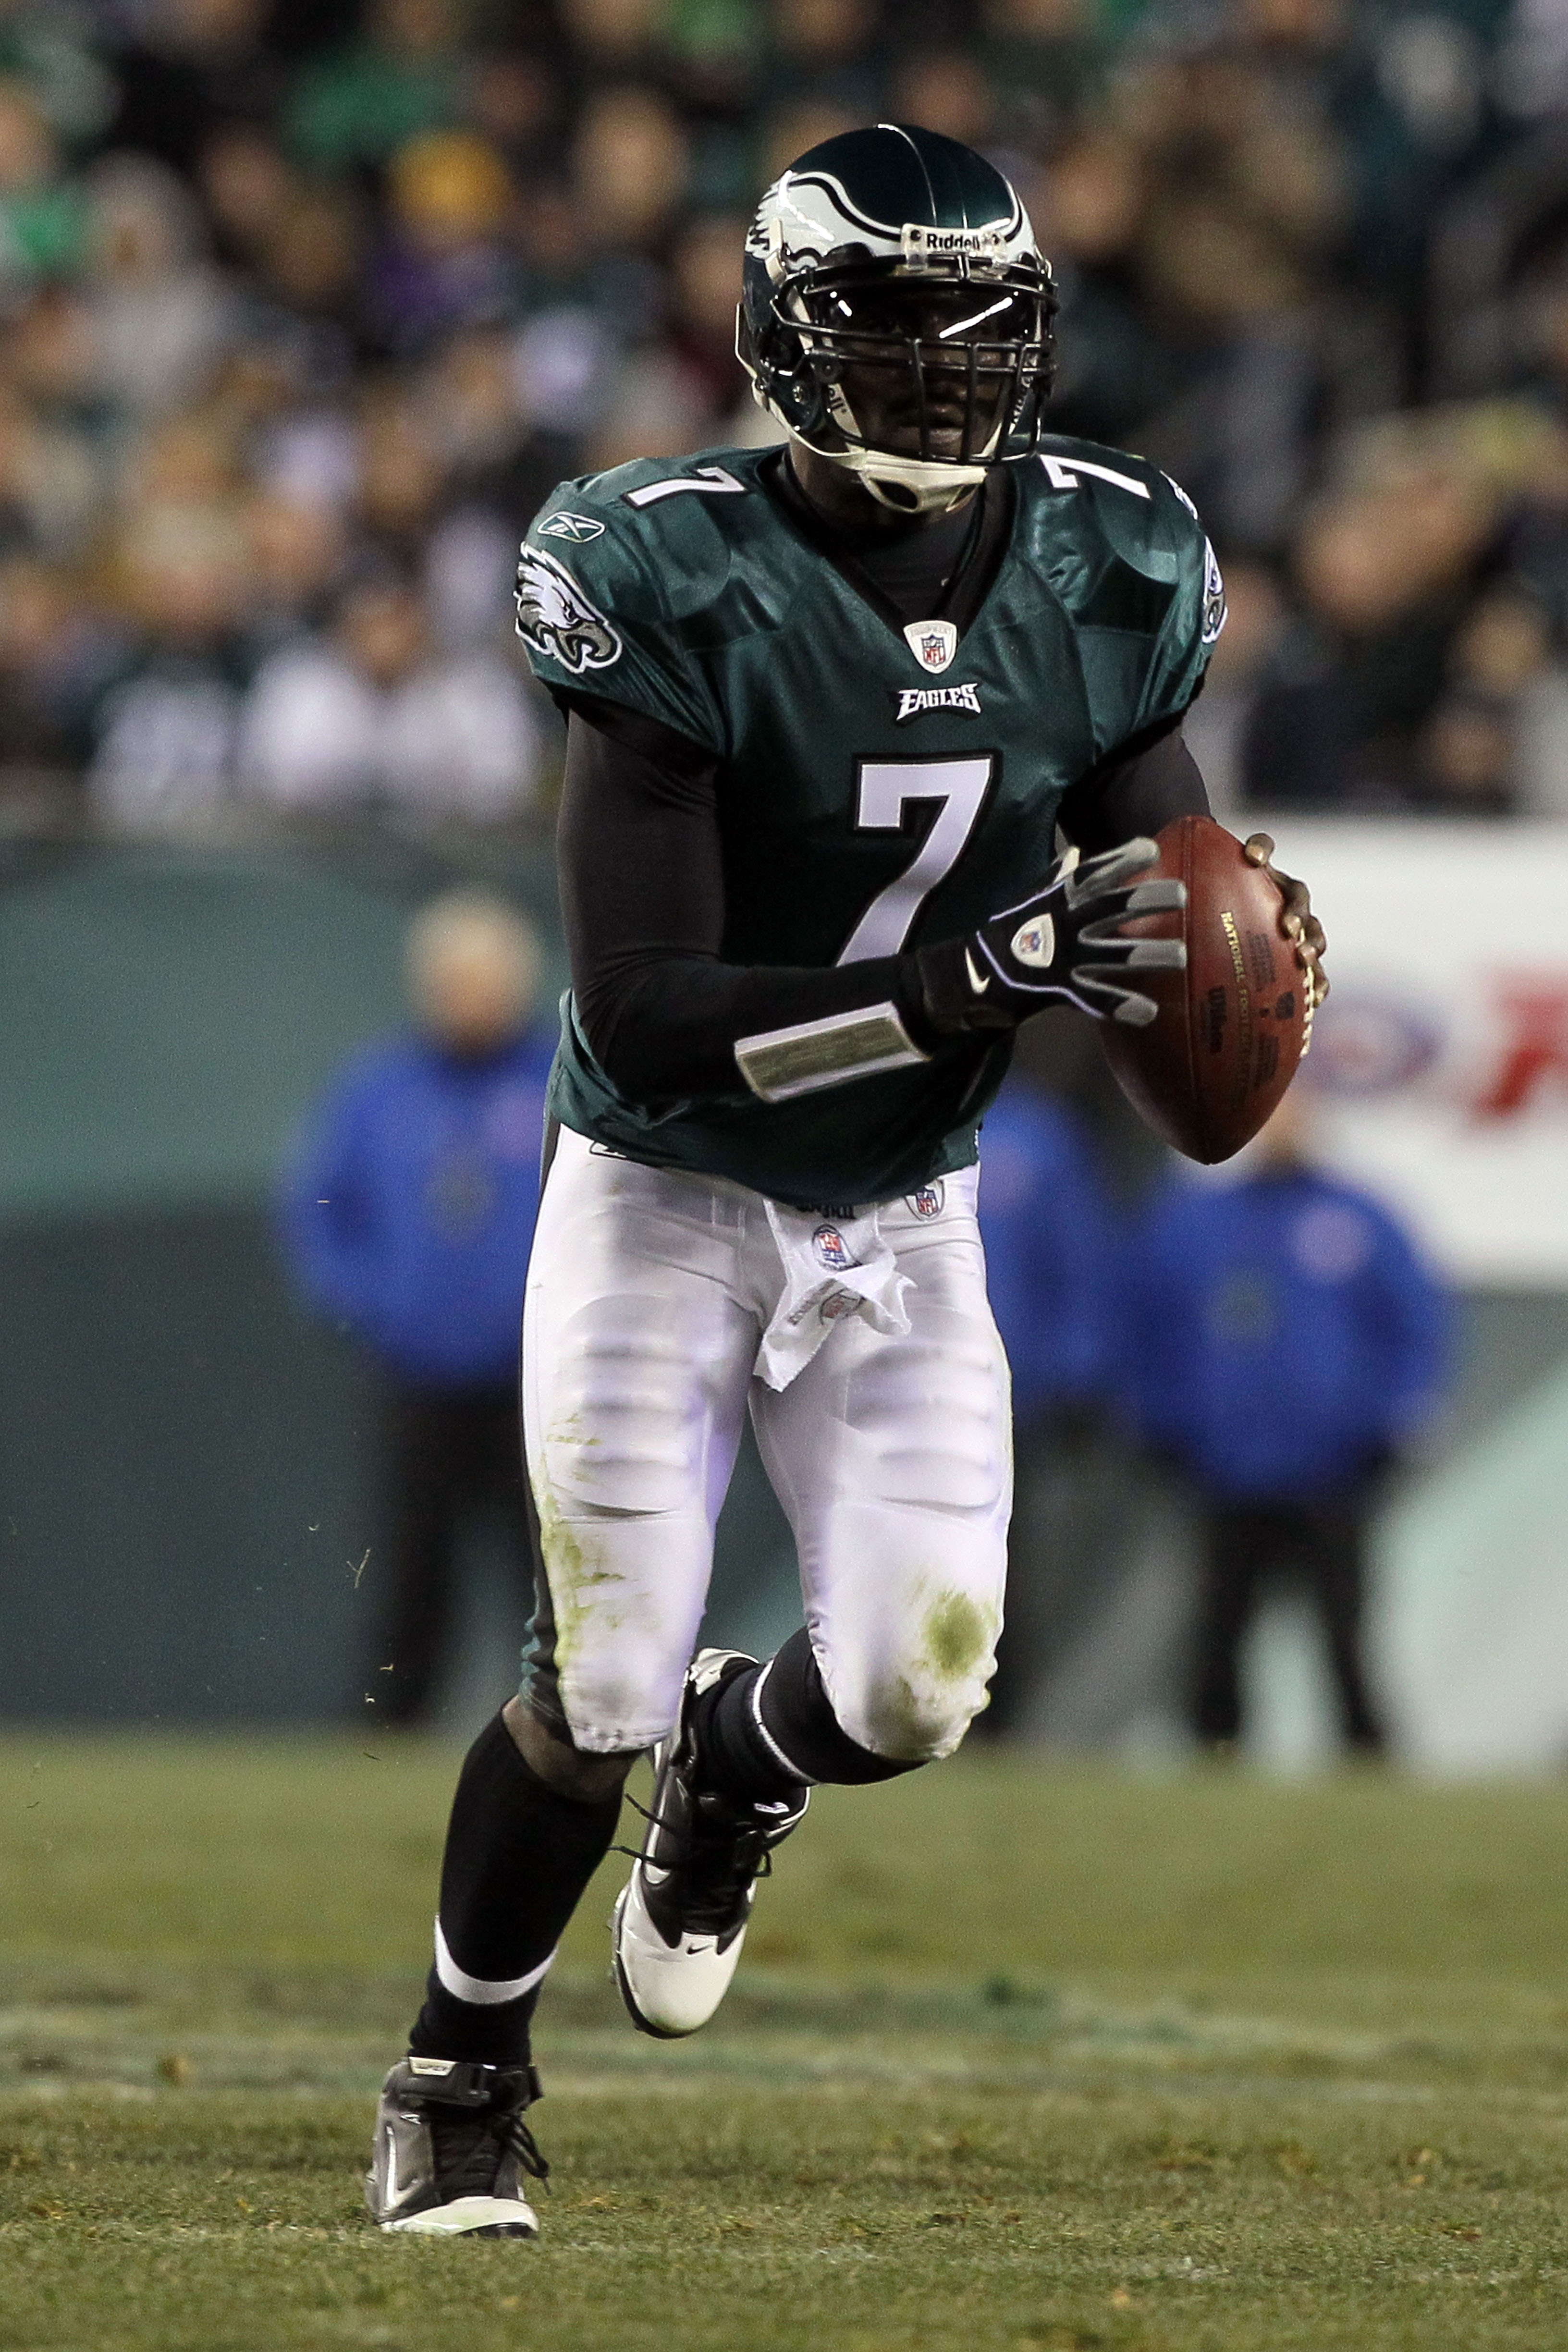 PHILADELPHIA, PA - DECEMBER 28: Michael Vick #7 of the Philadelphia Eagles looks to pass against the Minnesota Vikings at Lincoln Financial Field on December 28, 2010 in Philadelphia, Pennsylvania. (Photo by Jim McIsaac/Getty Images)